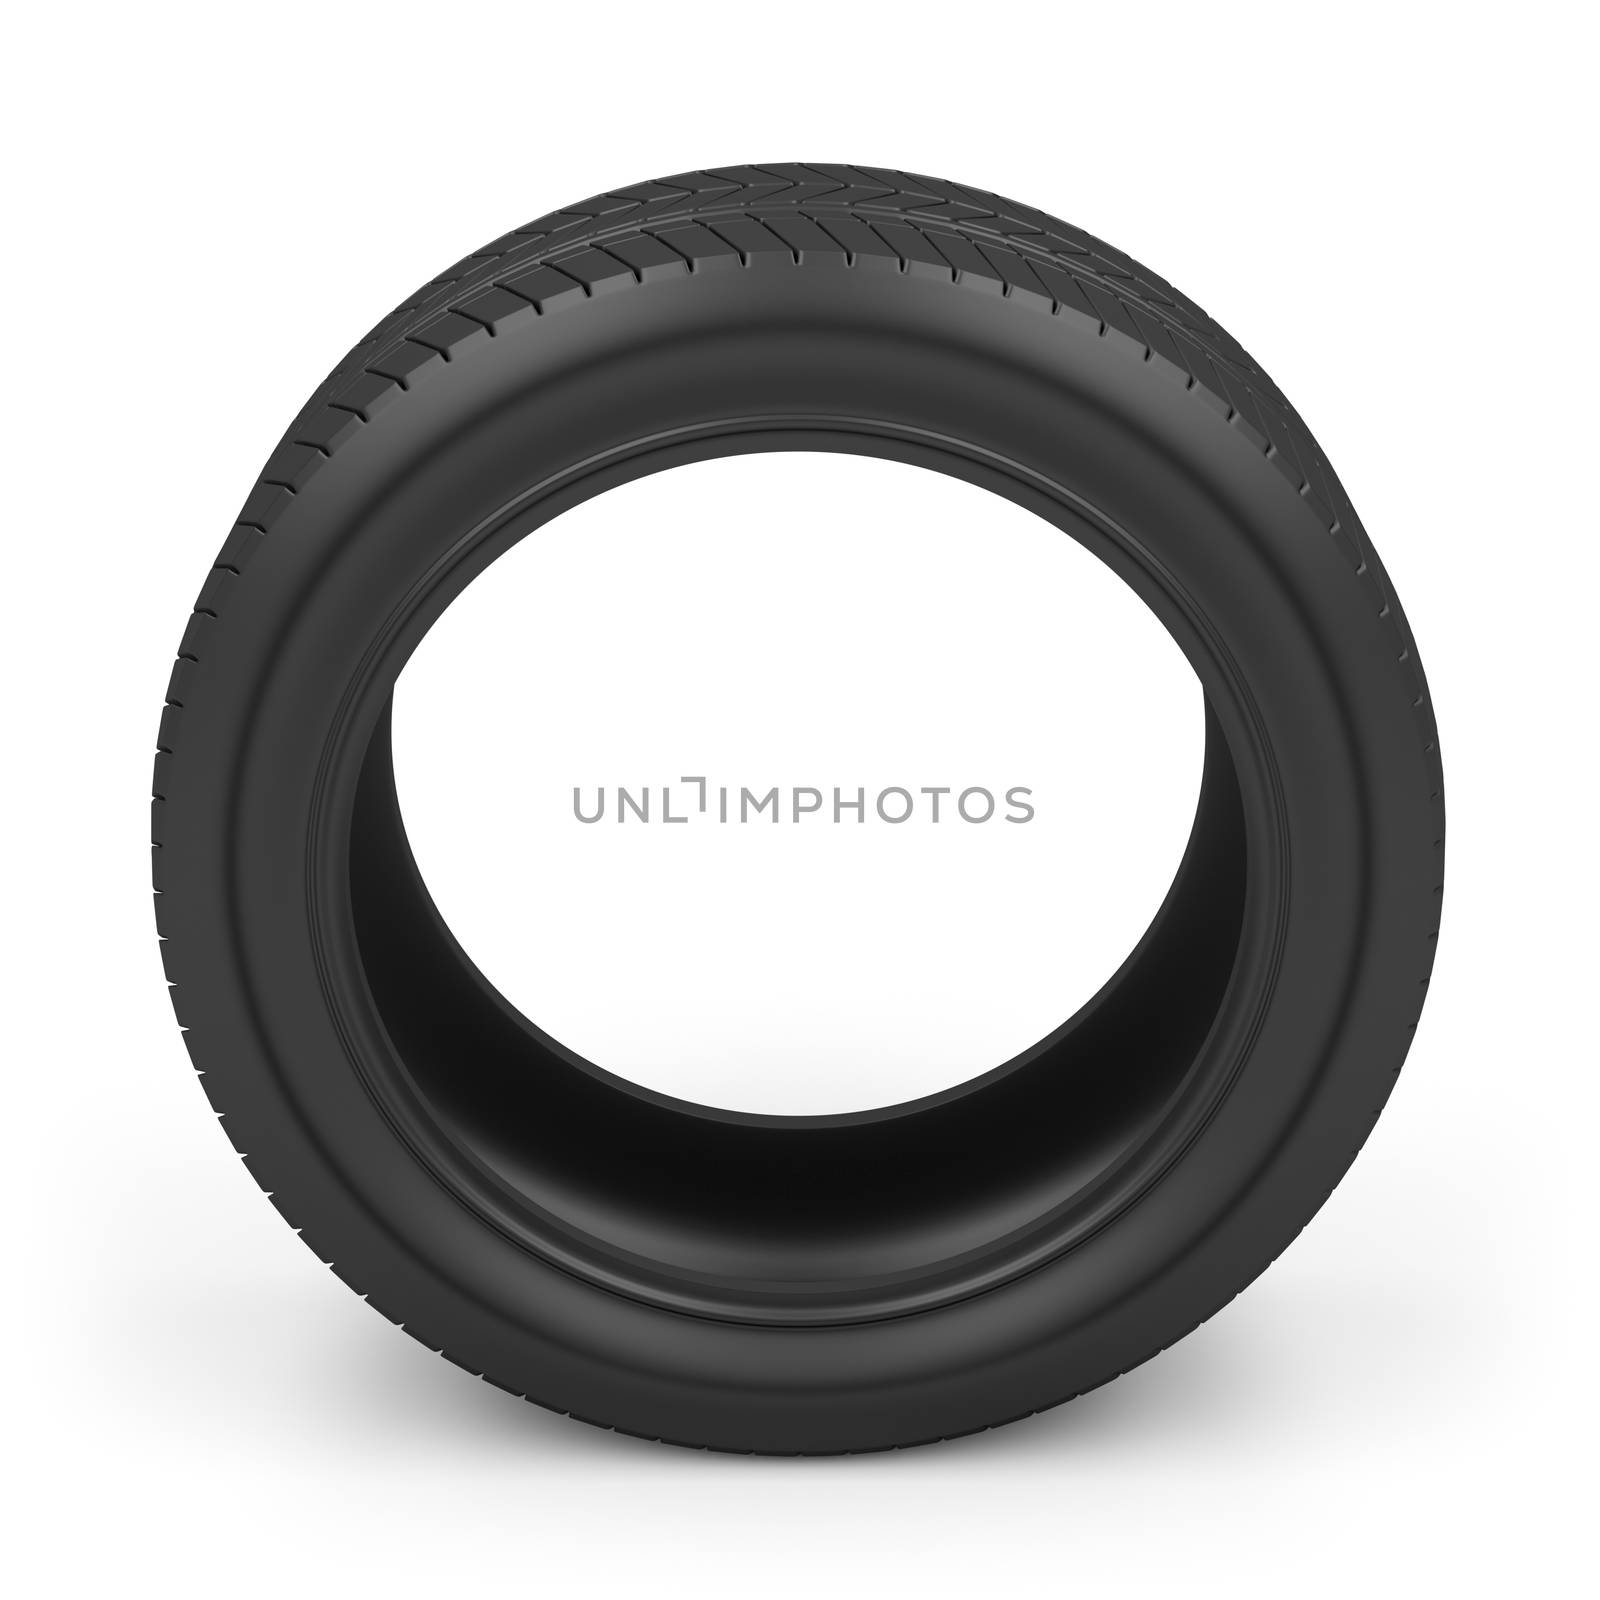 Automobile tire on white background